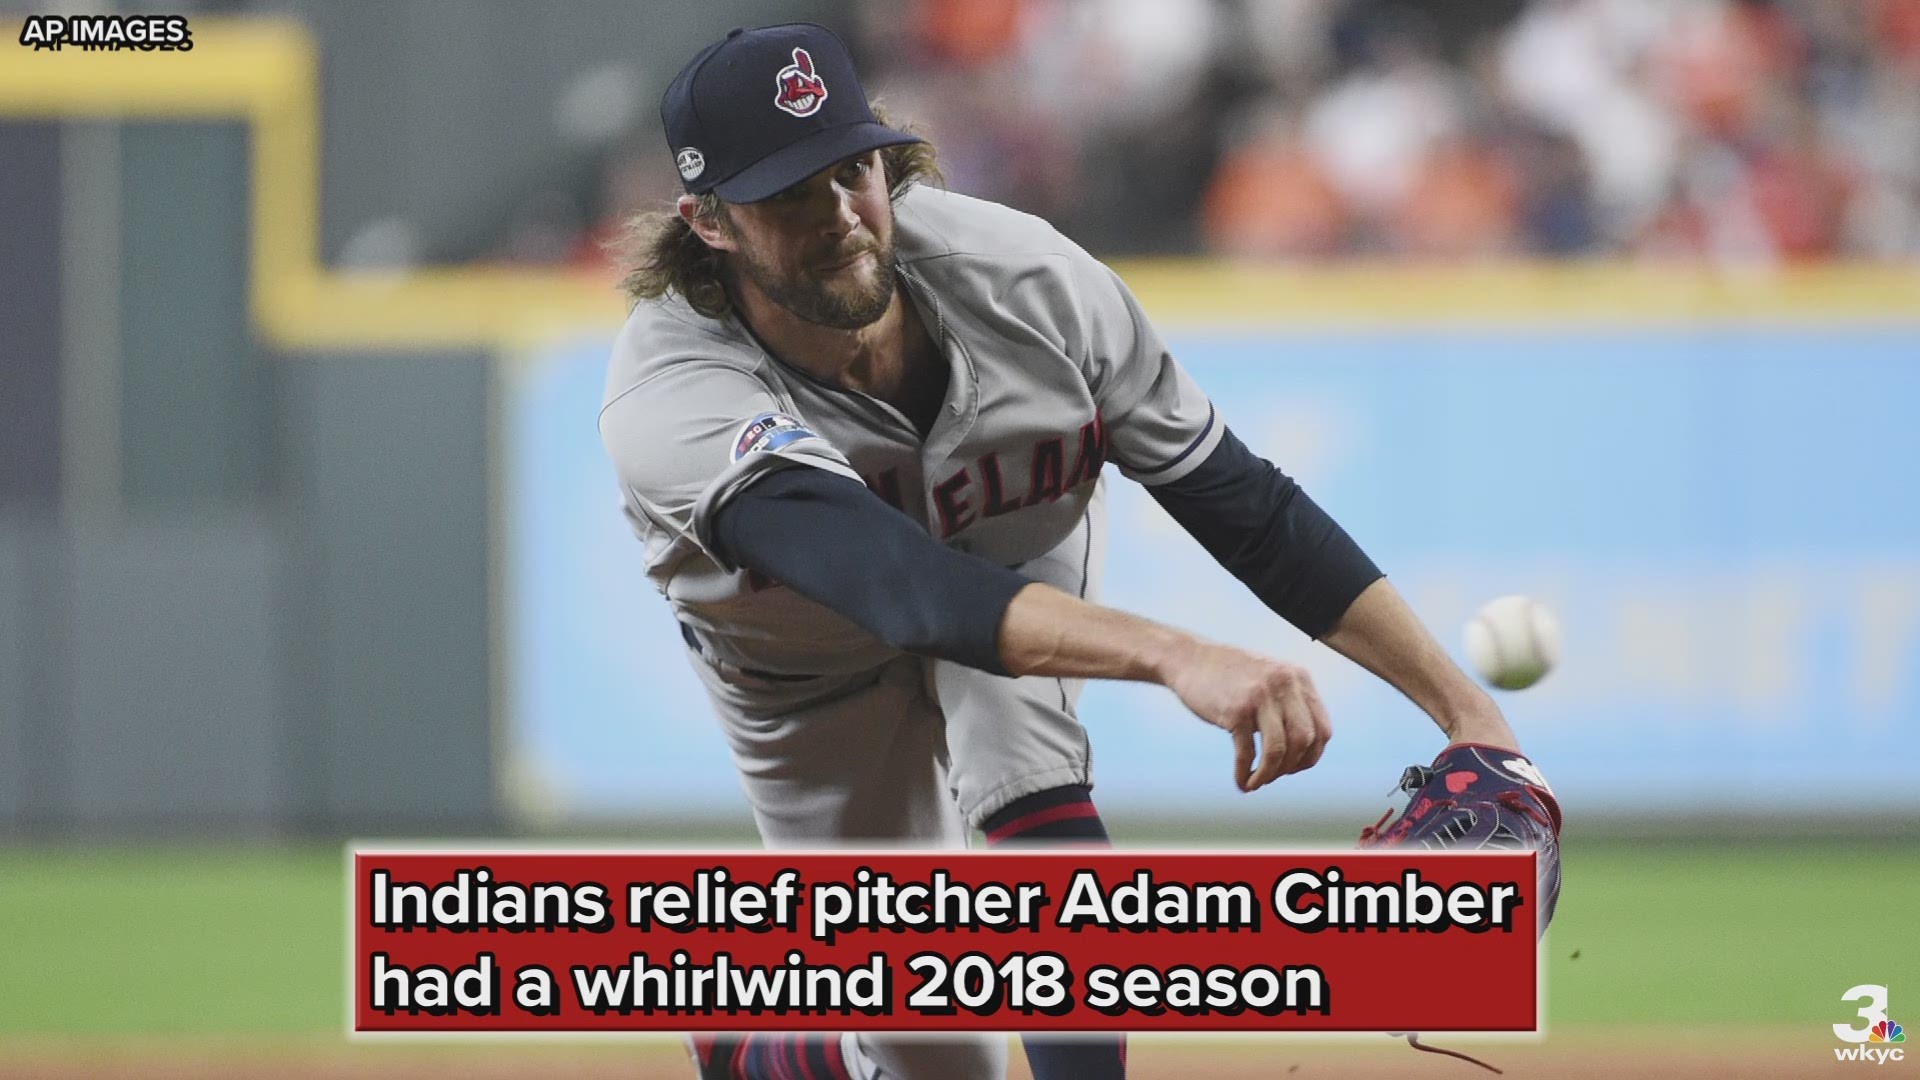 Adam Cimber and his wife, Lauren, had to reschedule their wedding because of the Cleveland Indians' playoff appearance.